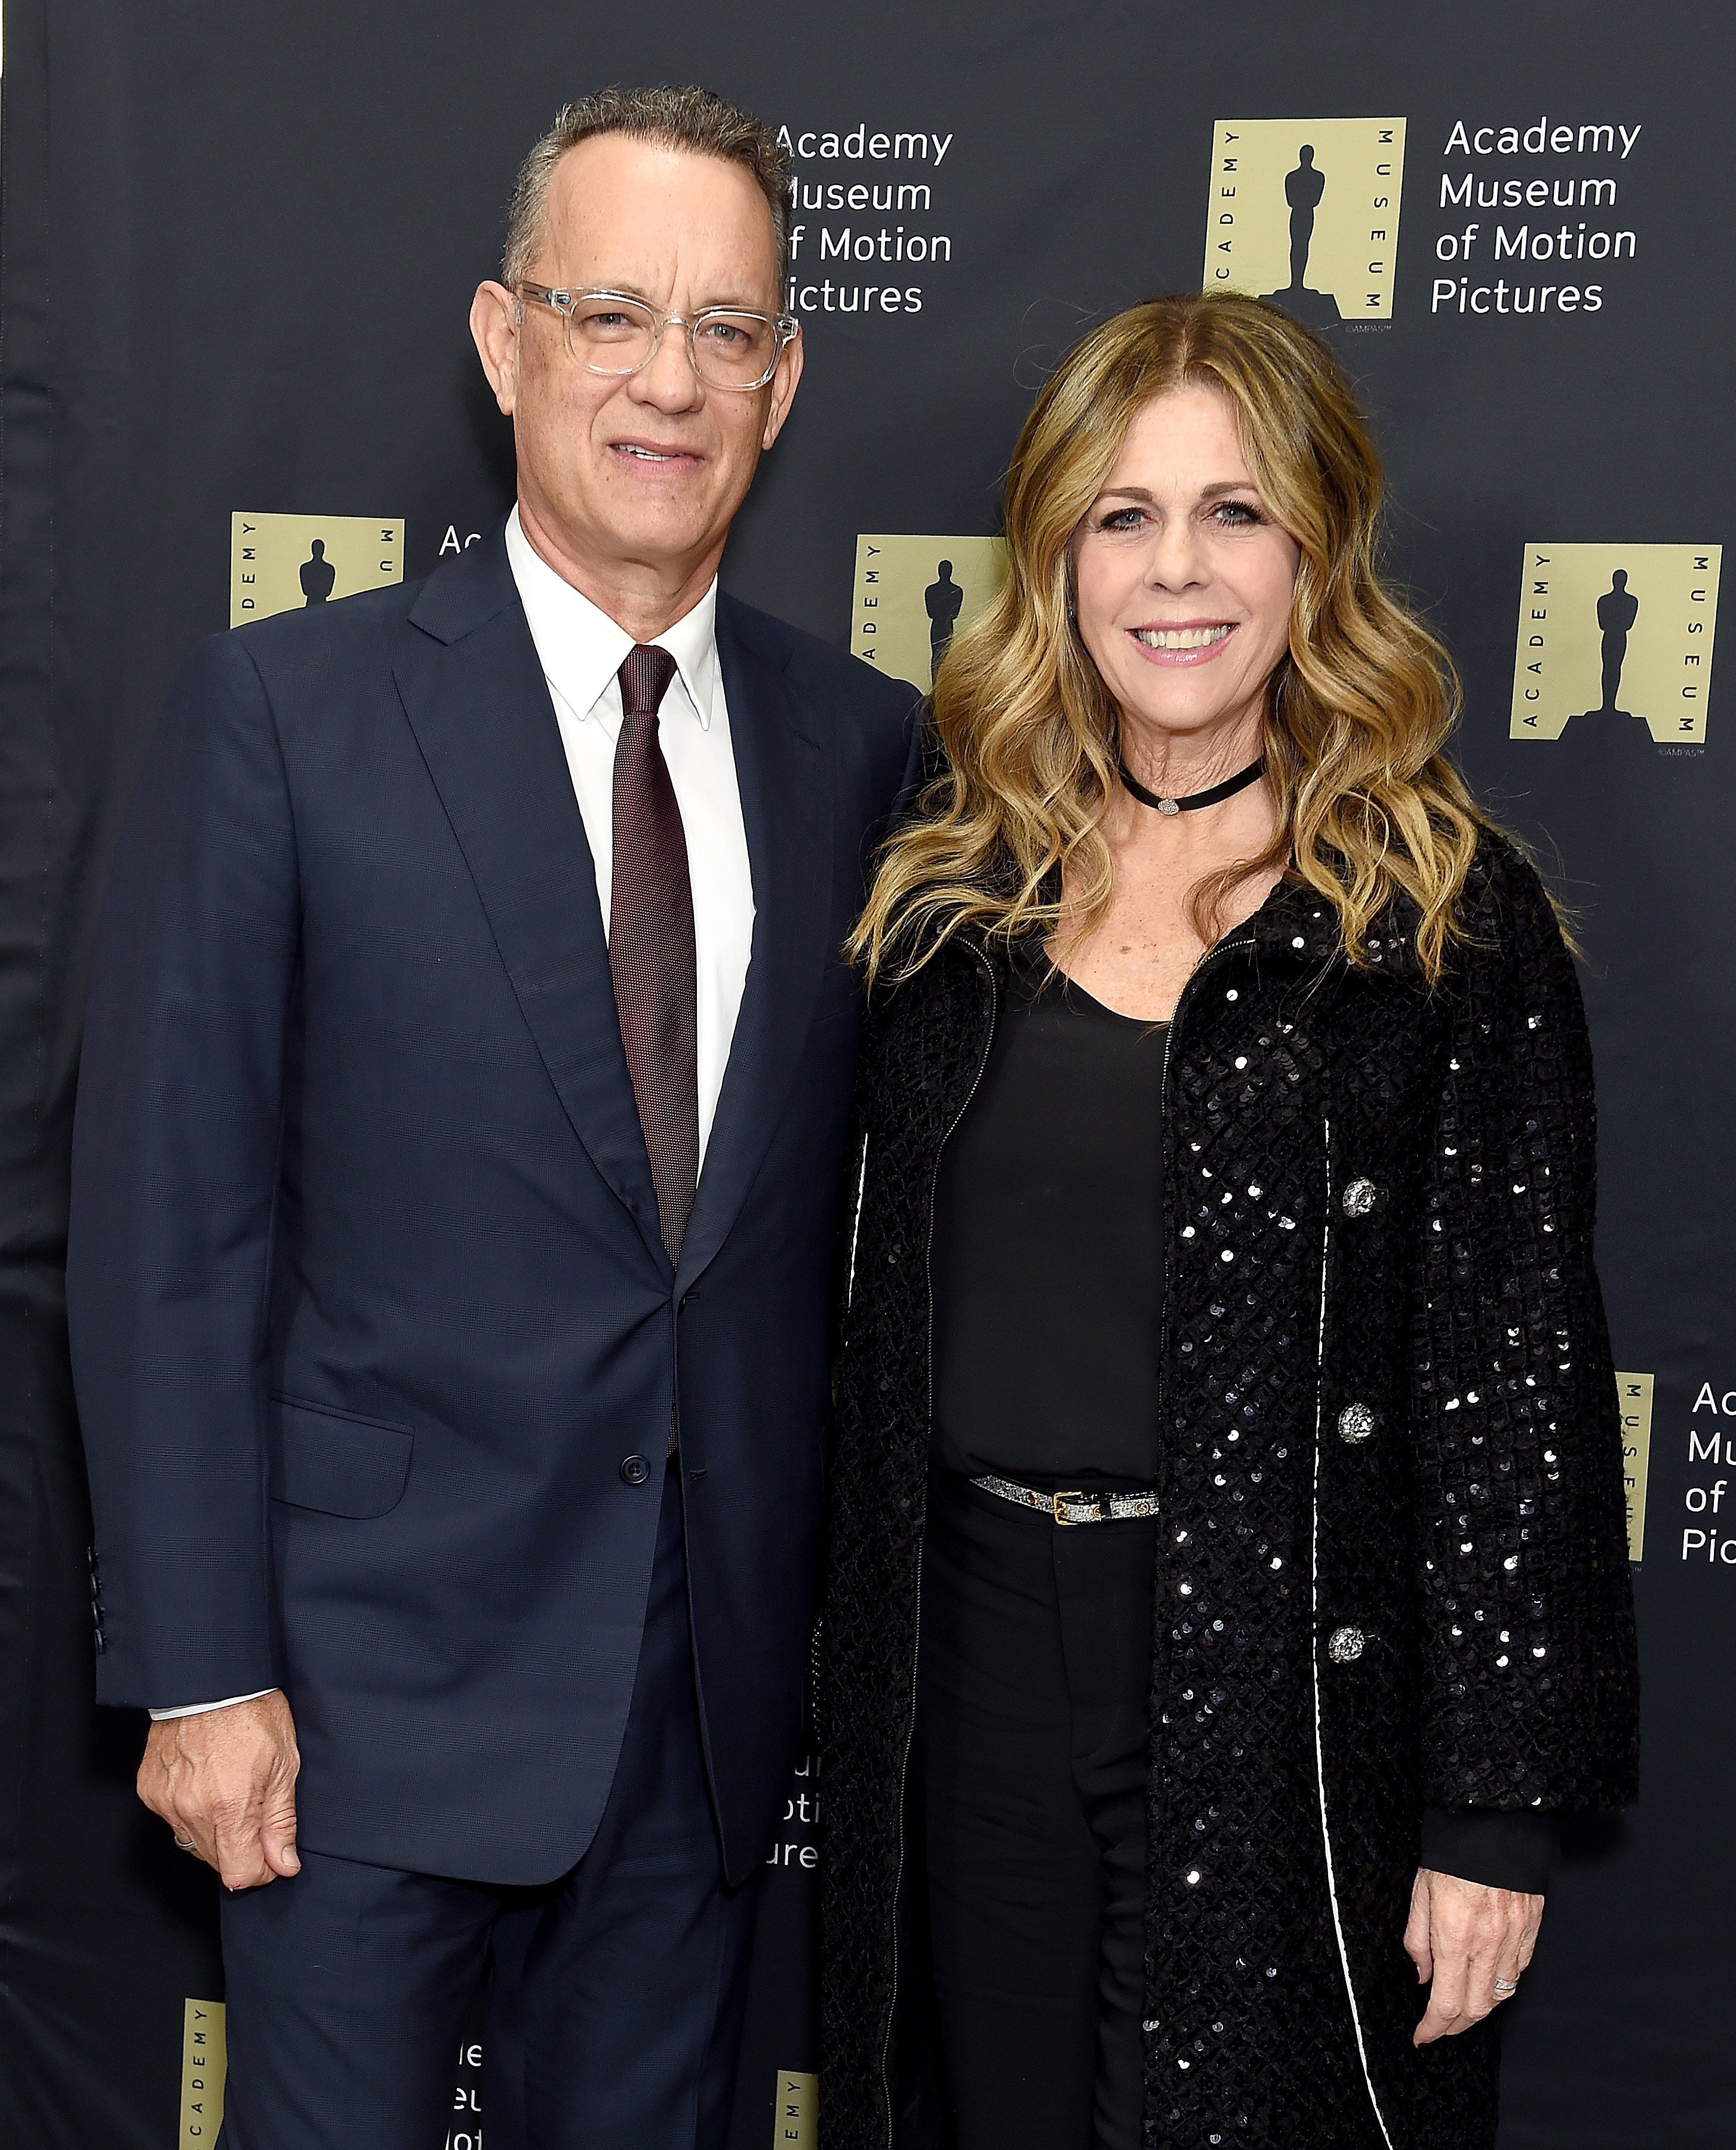 Tom Hanks and Rita Wilson attend the Unveiling of the Fully Restored Saban Building at Petersen Automotive Museum on December 4, 2018, in Los Angeles, California. | Photo: Getty Images.